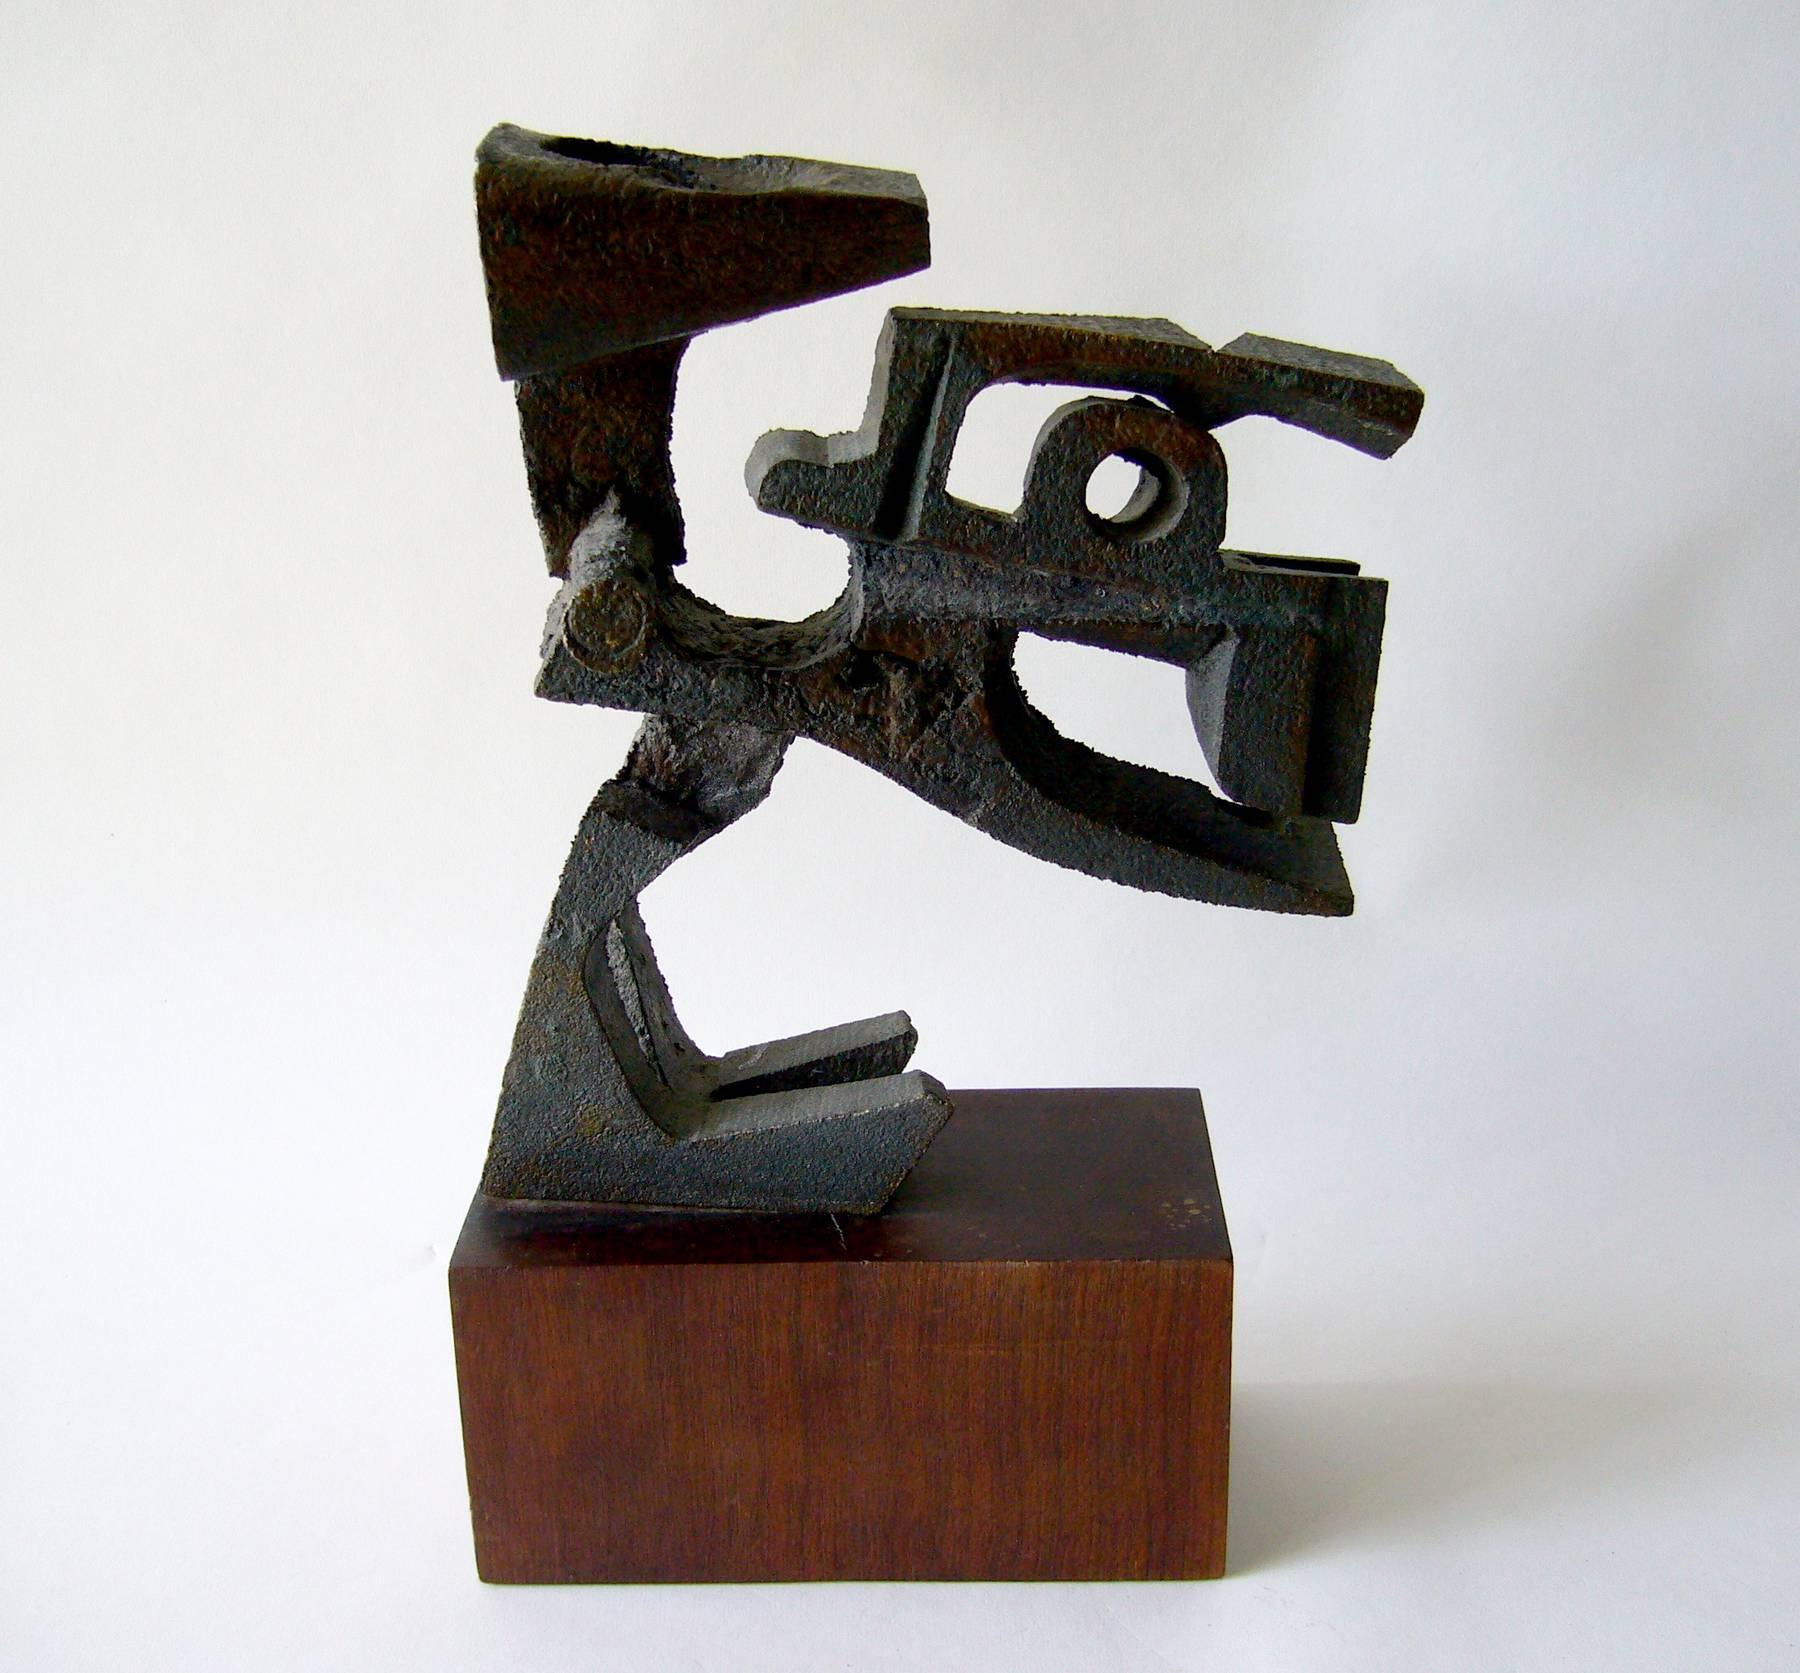 Bronze sculpture on wood base created by Italian born architect and sculptor Paolo Soleri of Arizona. Sculpture has an overall measurement of 15